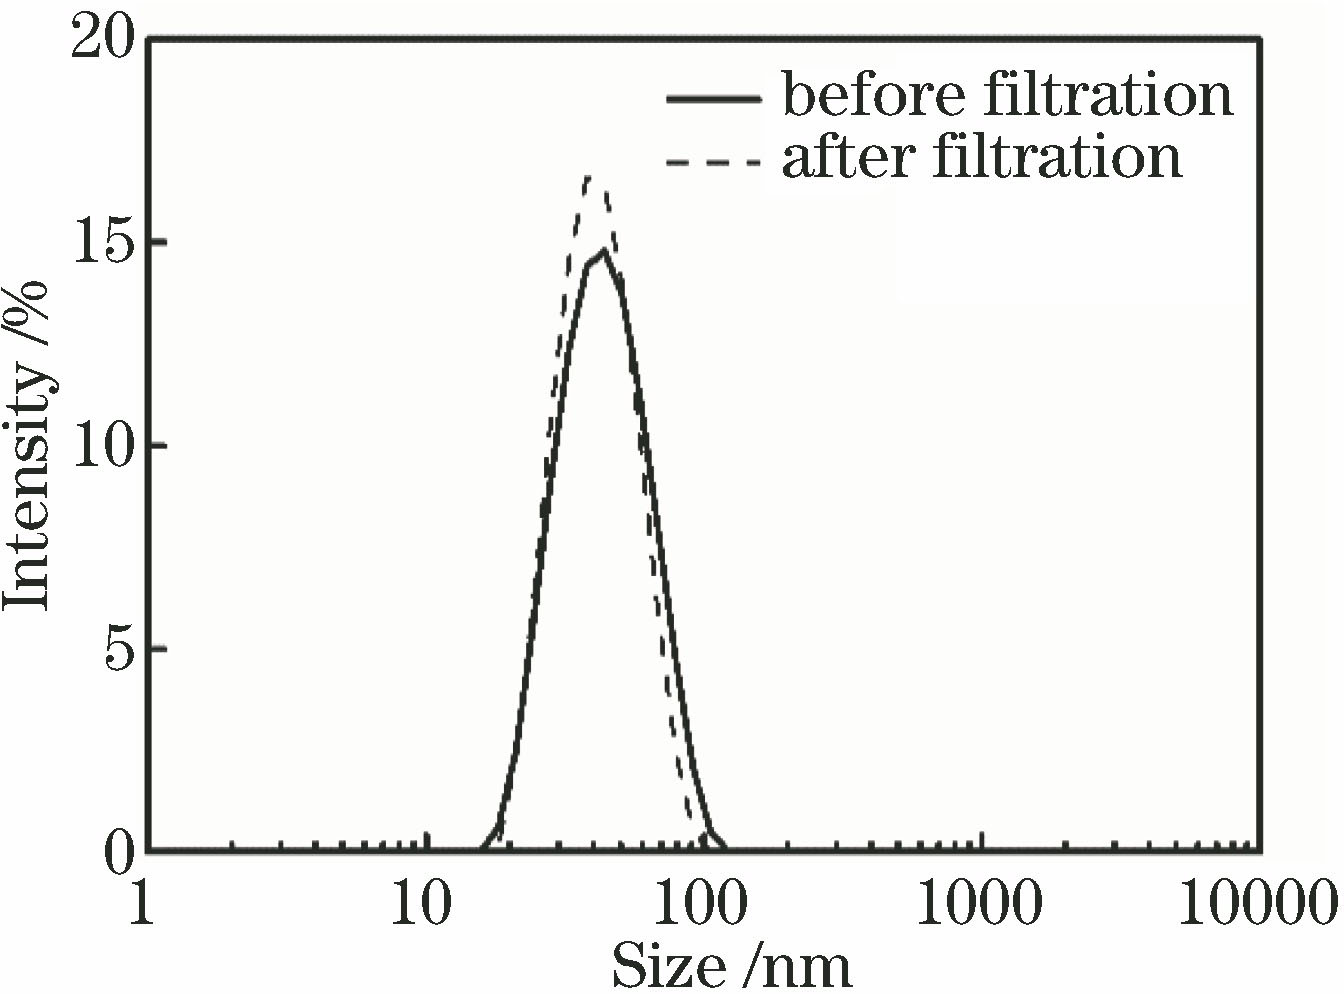 Particle distribution of SiO2 coating solutions before and after filtration